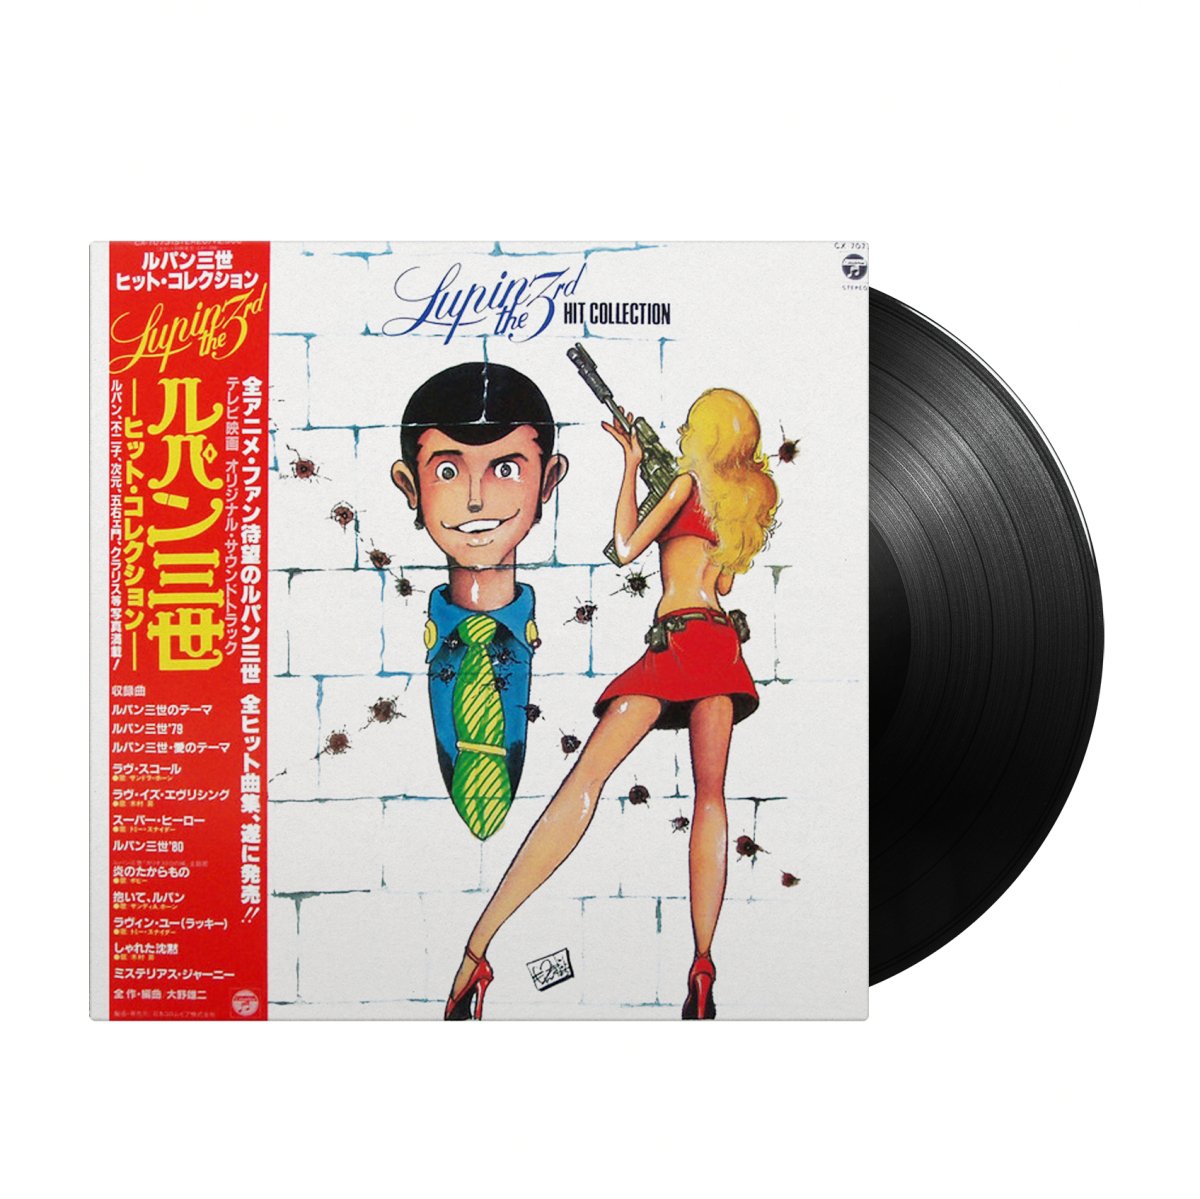 Yuji Ohno, You & Explosion Band - Lupin The 3rd: Hit Collection (Japan Import) - Inner Ocean Records